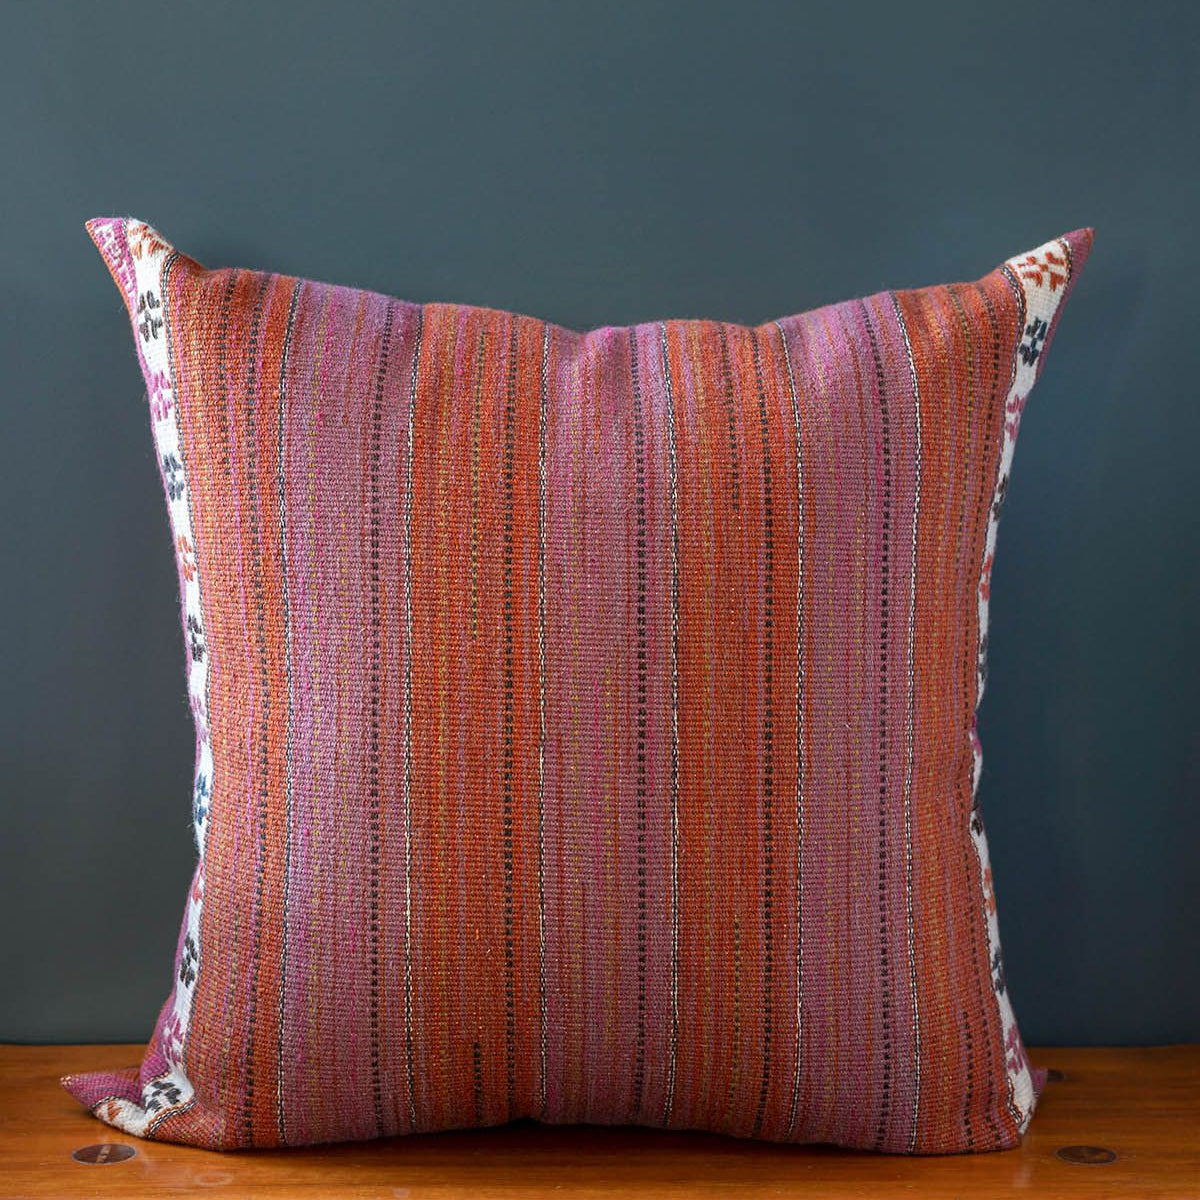 Pillows – made-to-order